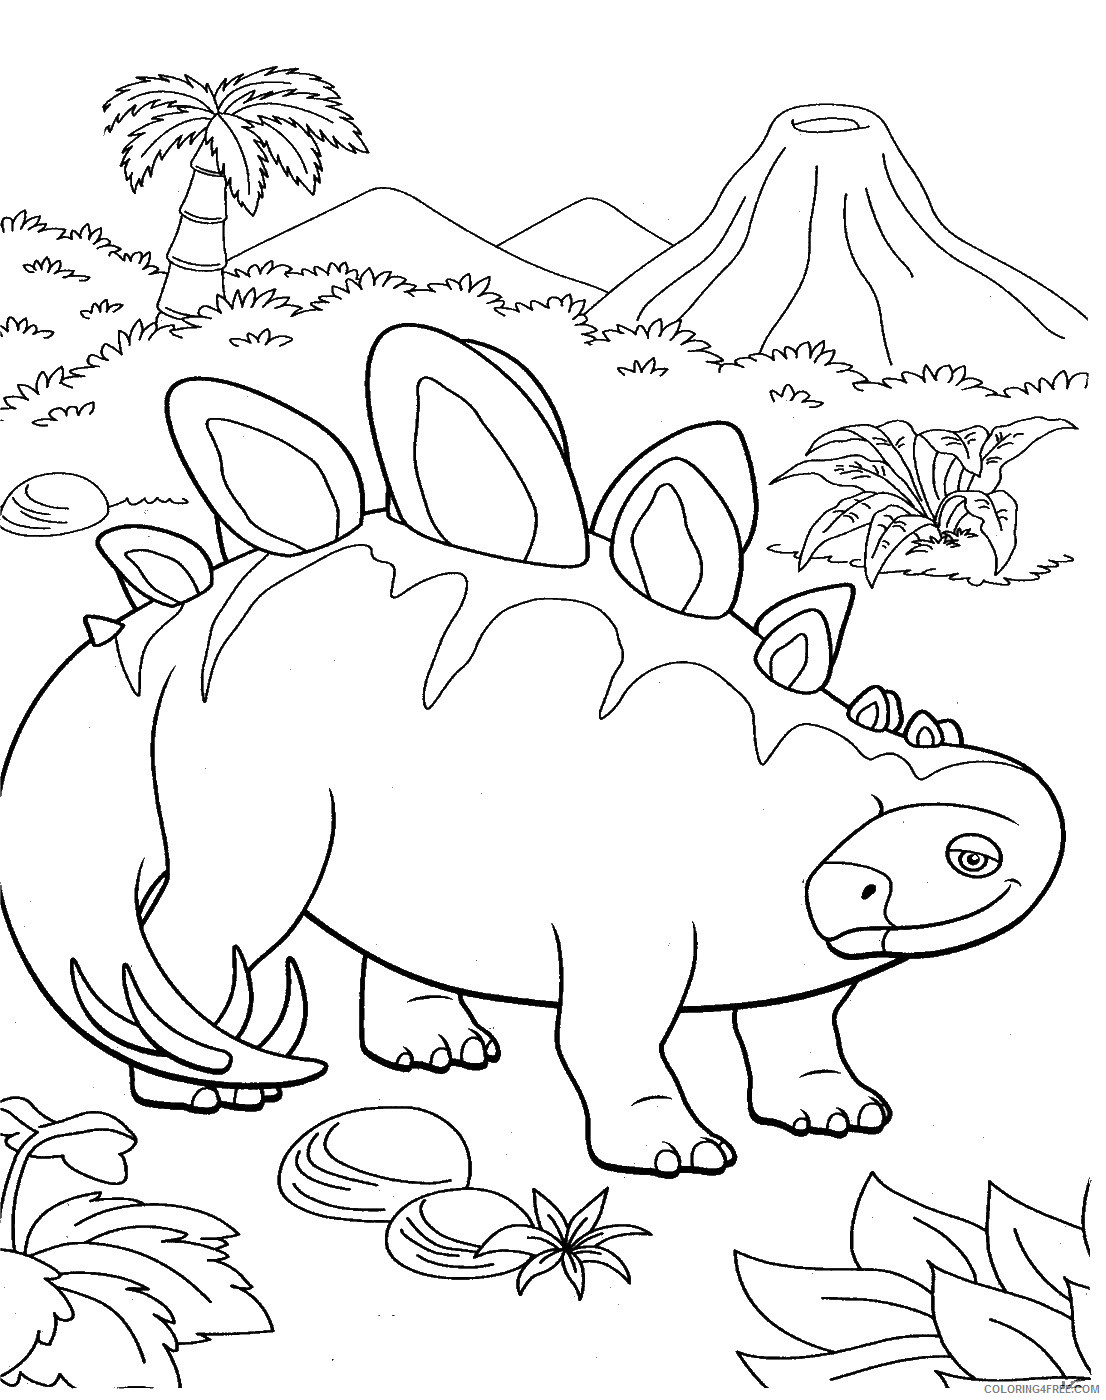 Dinosaur Train Coloring Pages Cartoons dino_train_cl_08 Printable 2020 ...